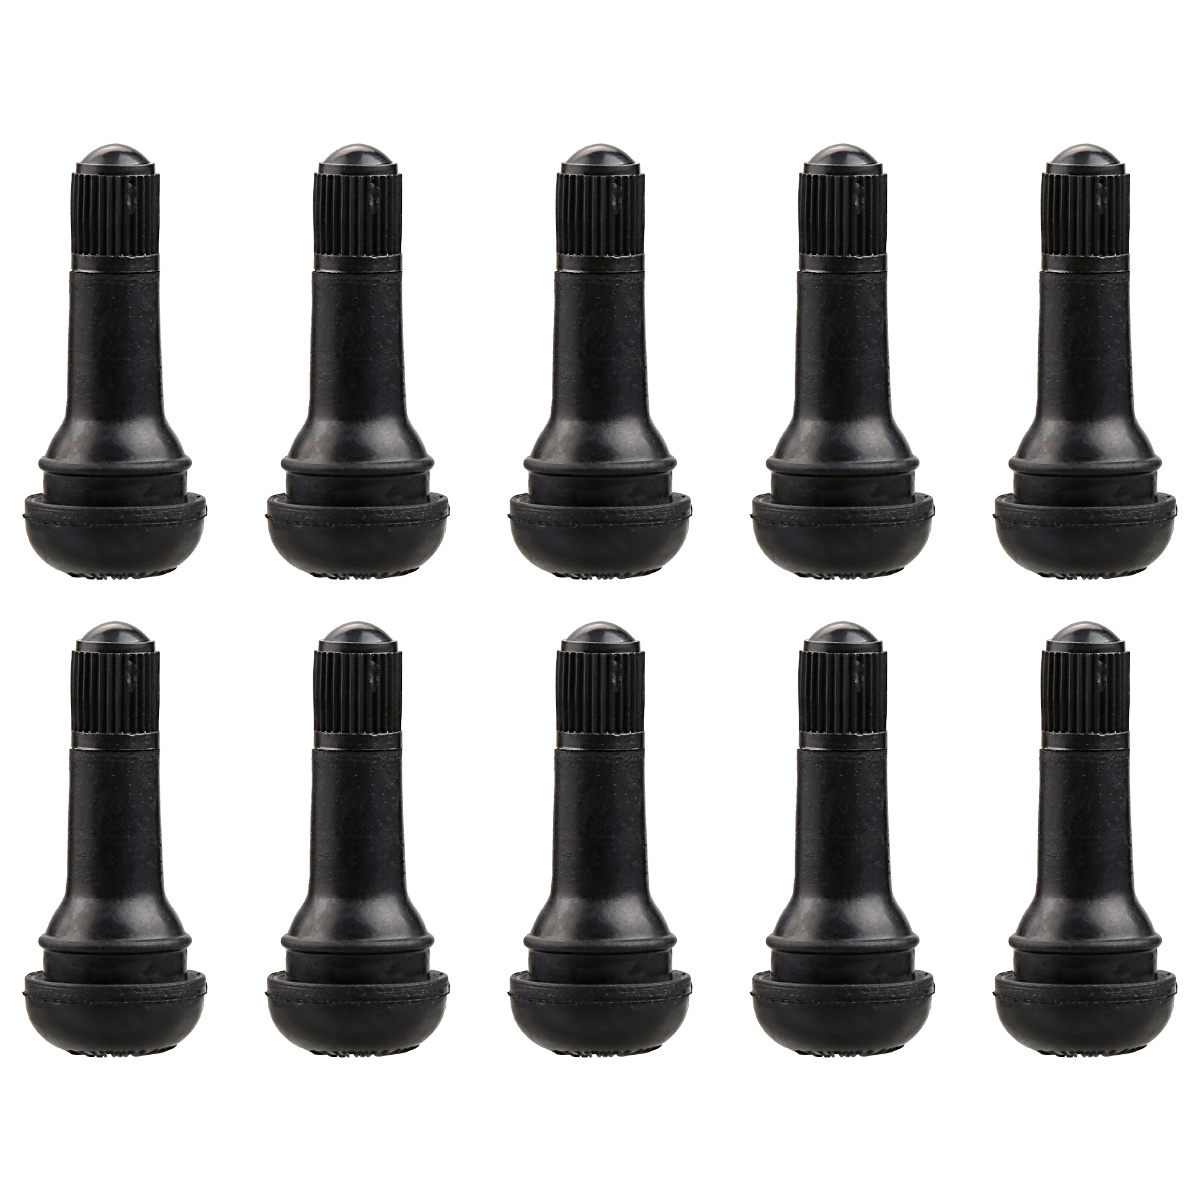 Tyre Tire Valves Snap In Tire Tyre Valve Stem Car Motorcycle Universal  Replacement Snap In Tire Tyre Valve Stem (tr414)black,10pcs